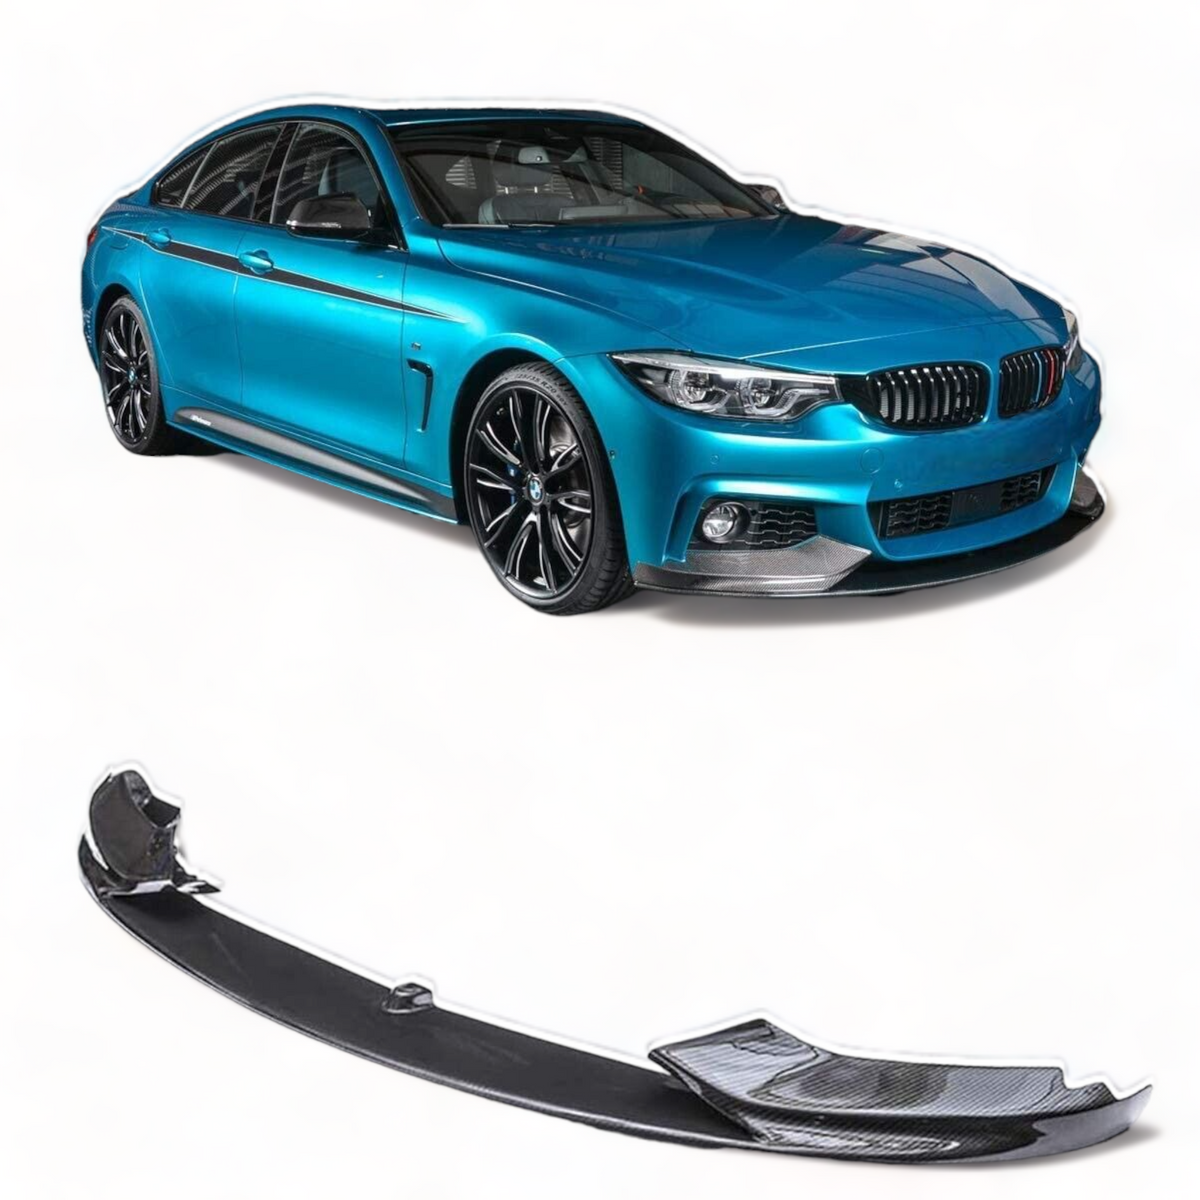 Full Body Kit - Fits BMW F33 4 Series - Dual Exit - Carbon Look